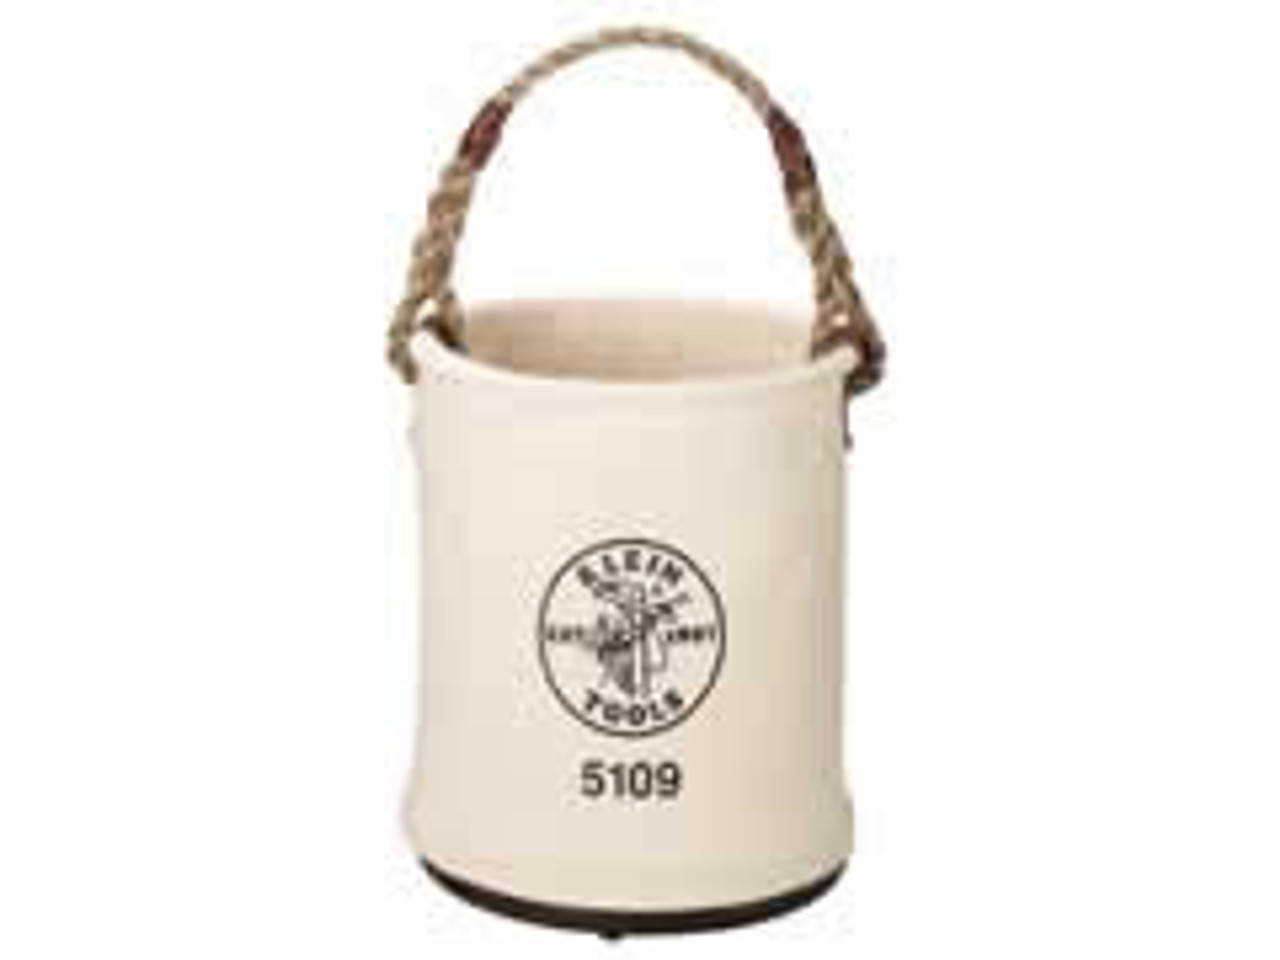 KLEIN 5109PS Wide-Opening Straight-Wall Bucket - Inside Pocket and Swivel Snap 55509-1 NEW